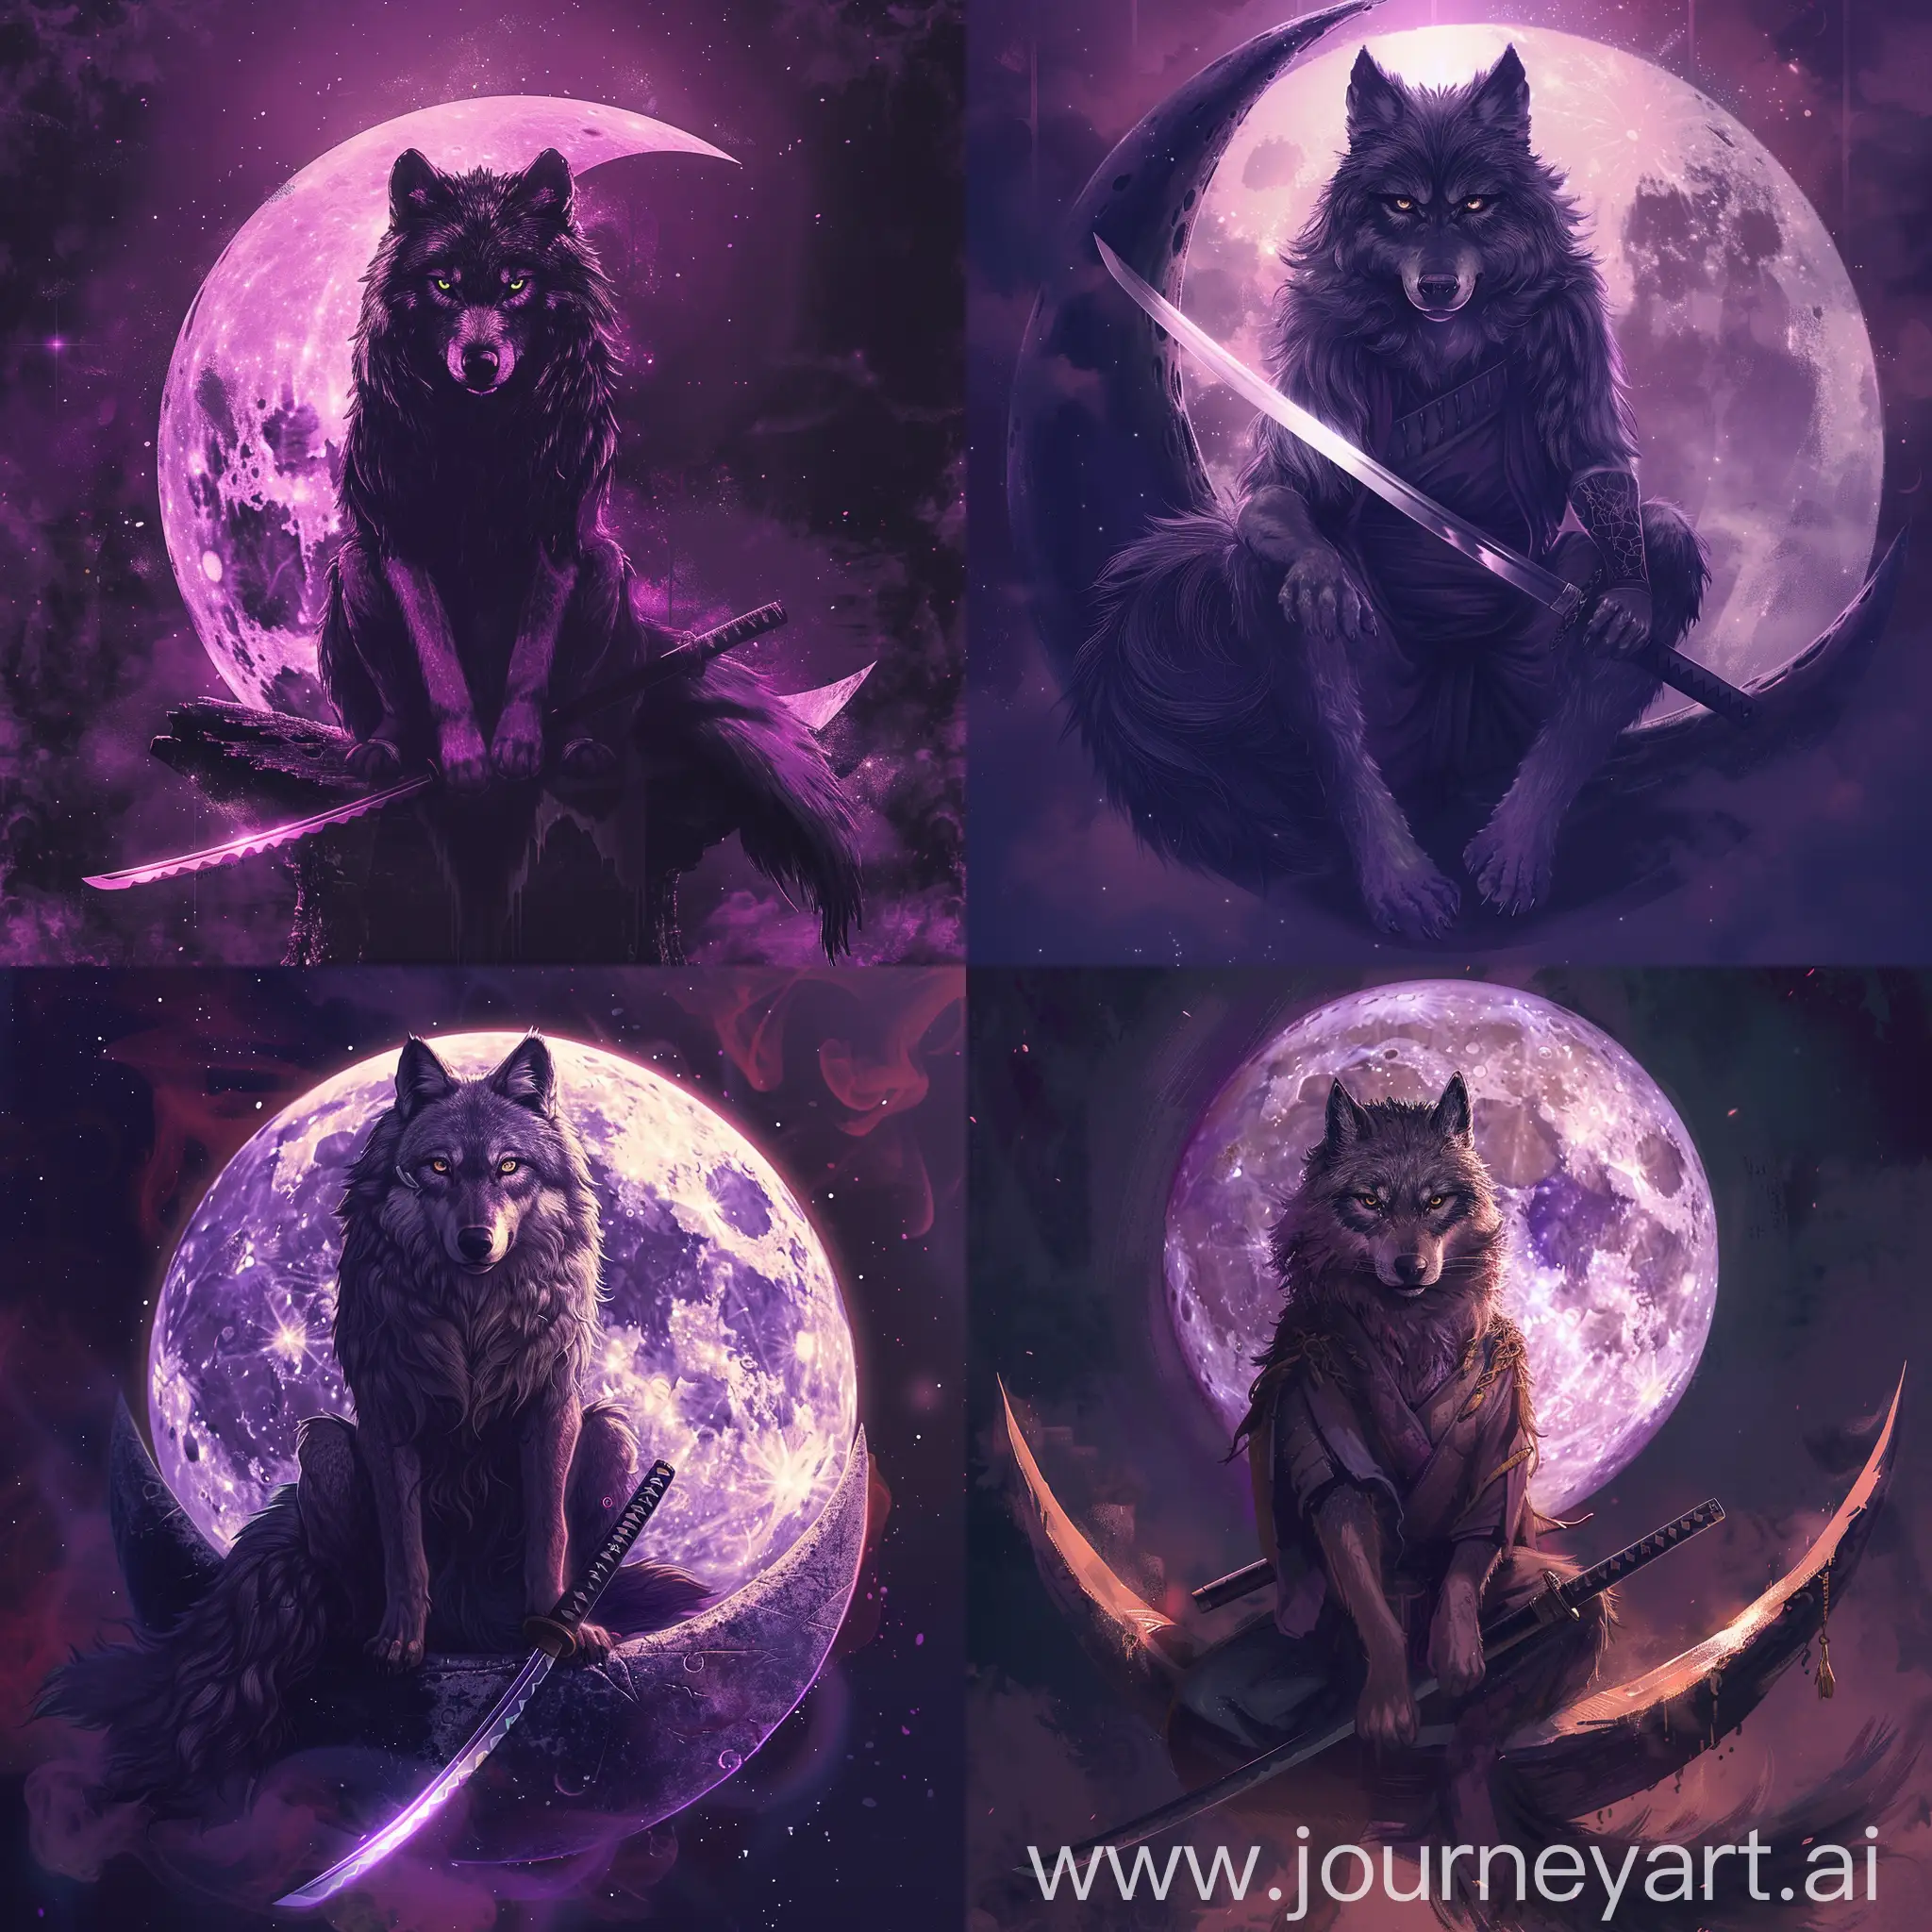 A majestic, dark-furred wolf with piercing eyes sits regally upon a crescent-shaped half moon. The moon above radiates a stunning, ethereal shade of purple, casting a mystical glow all around. In the wolf's strong, steady hands, a gleaming katana blade catches the moonlight, its blade reflecting the lunar brilliance. The scene conveys a sense of ancient wisdom, eerie beauty, and tranquil power.